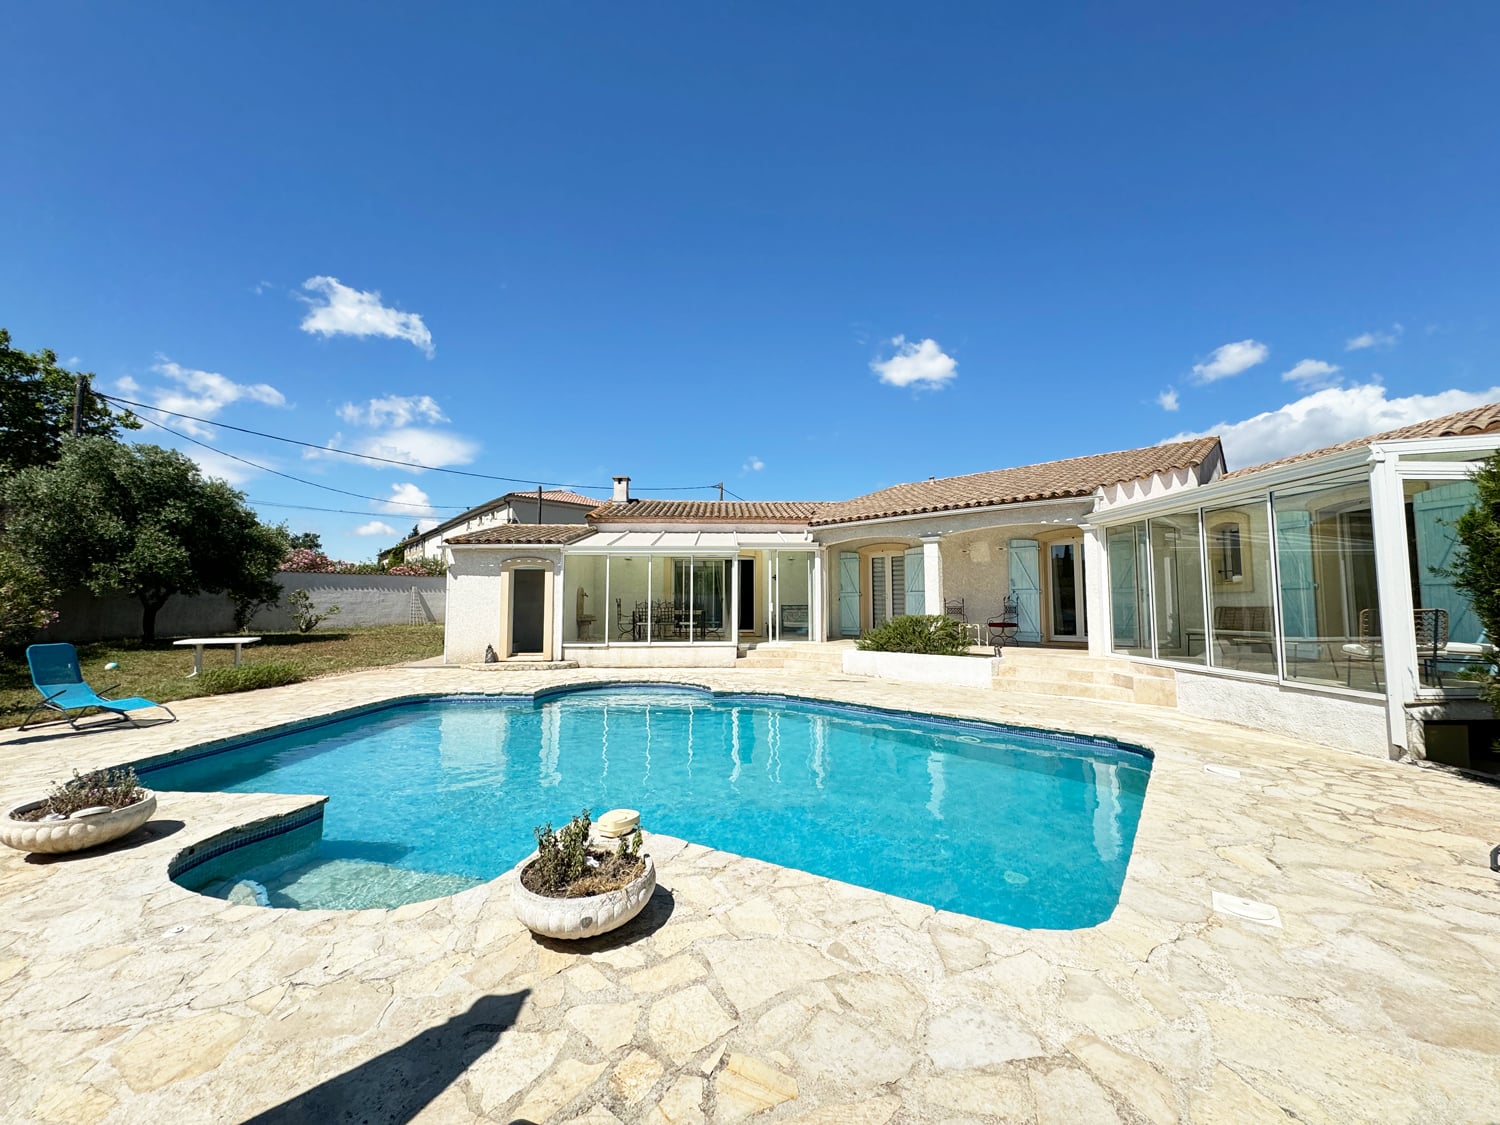 Rental villa in South of France with private pool